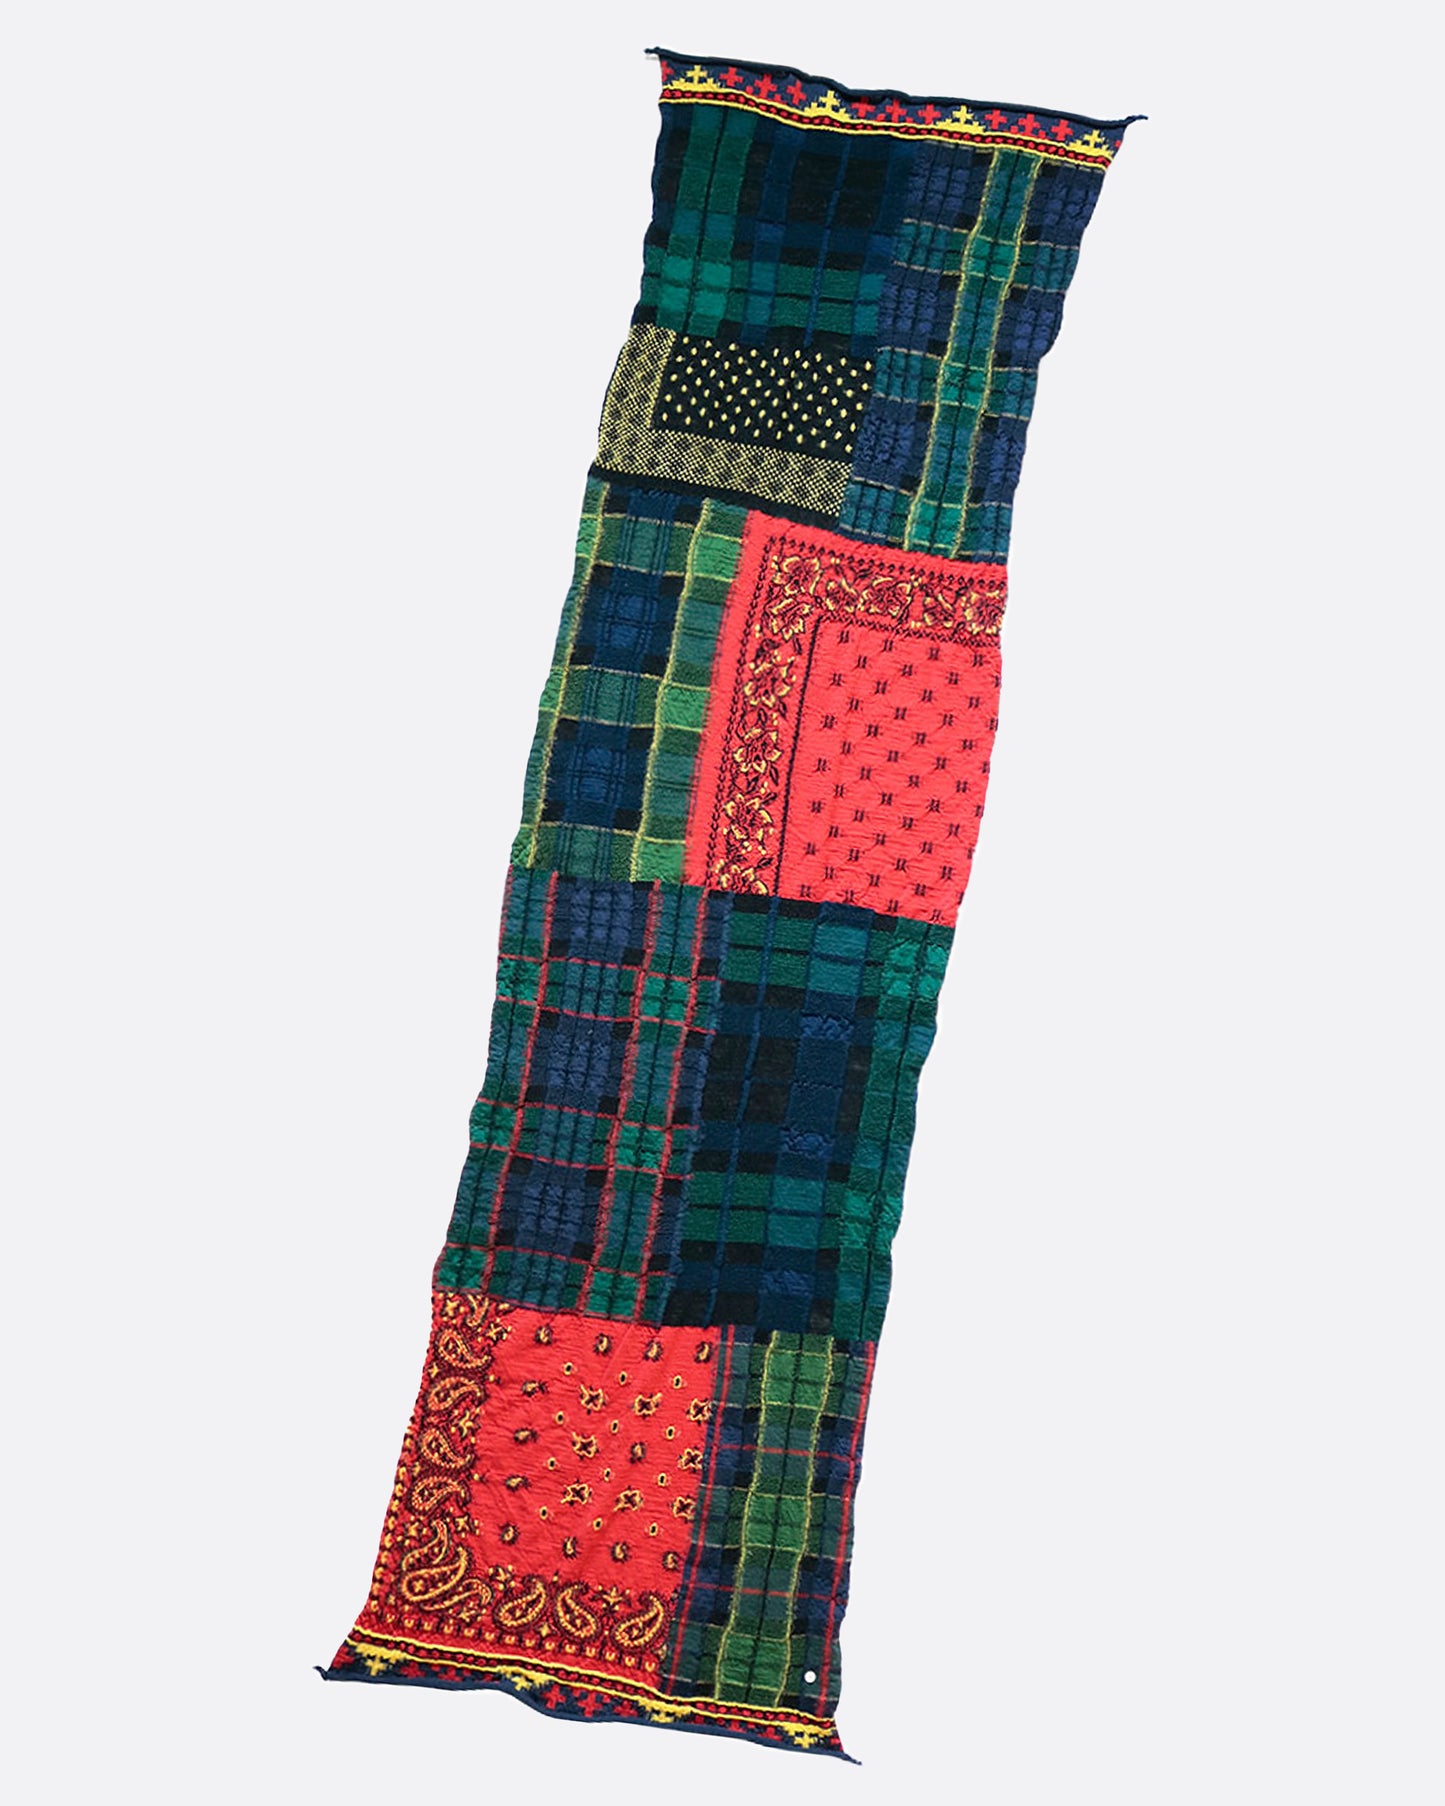 A fluffy wool patchwork scarf that combines different tartan checks and bandana patterns.